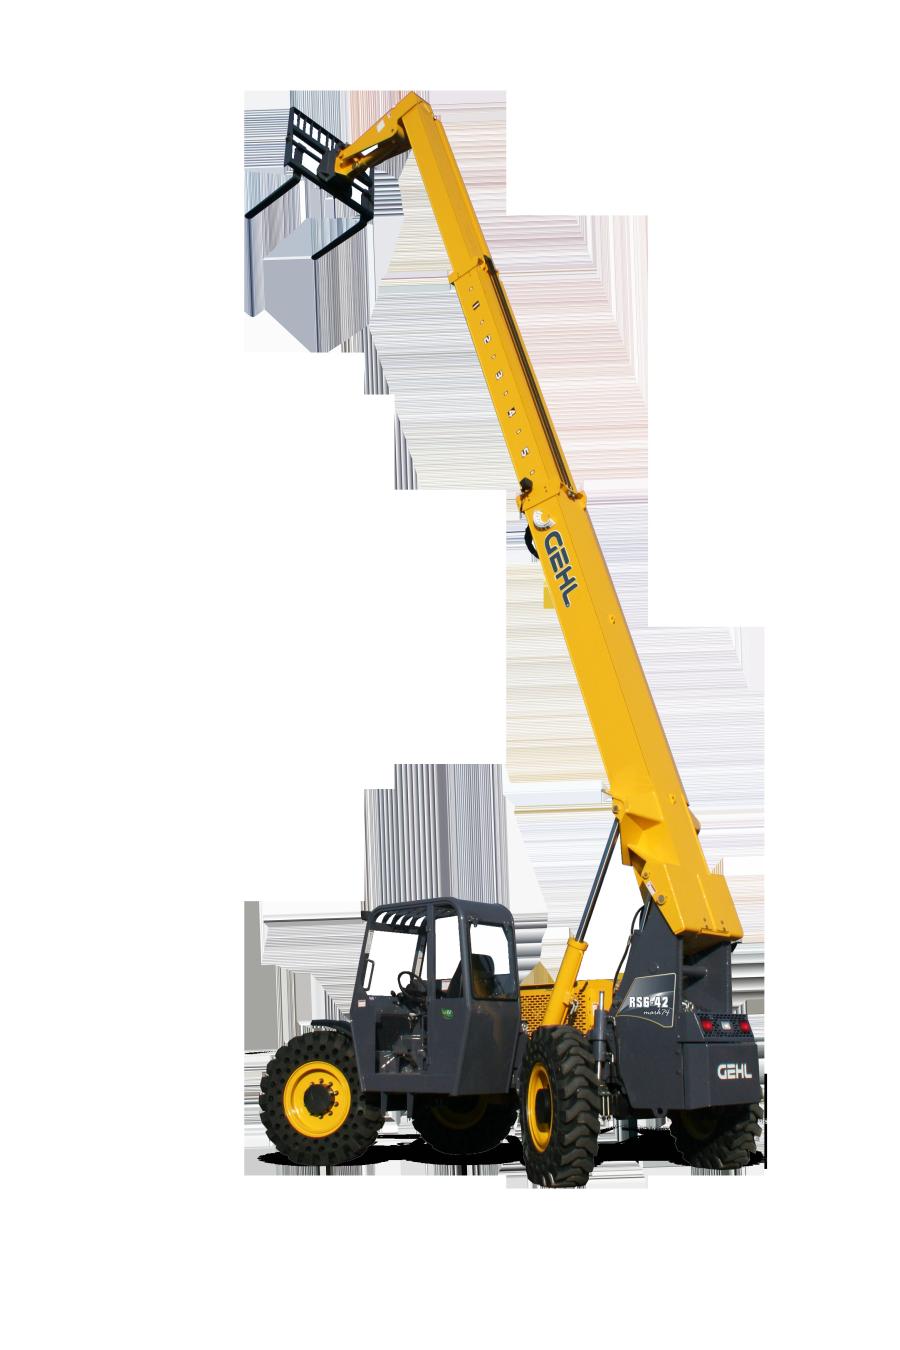 The all-new Mark74 option will be available on the following Gehl telescopic handler models: RS6-42, RS8-42, RS8-44 and RS10-55.